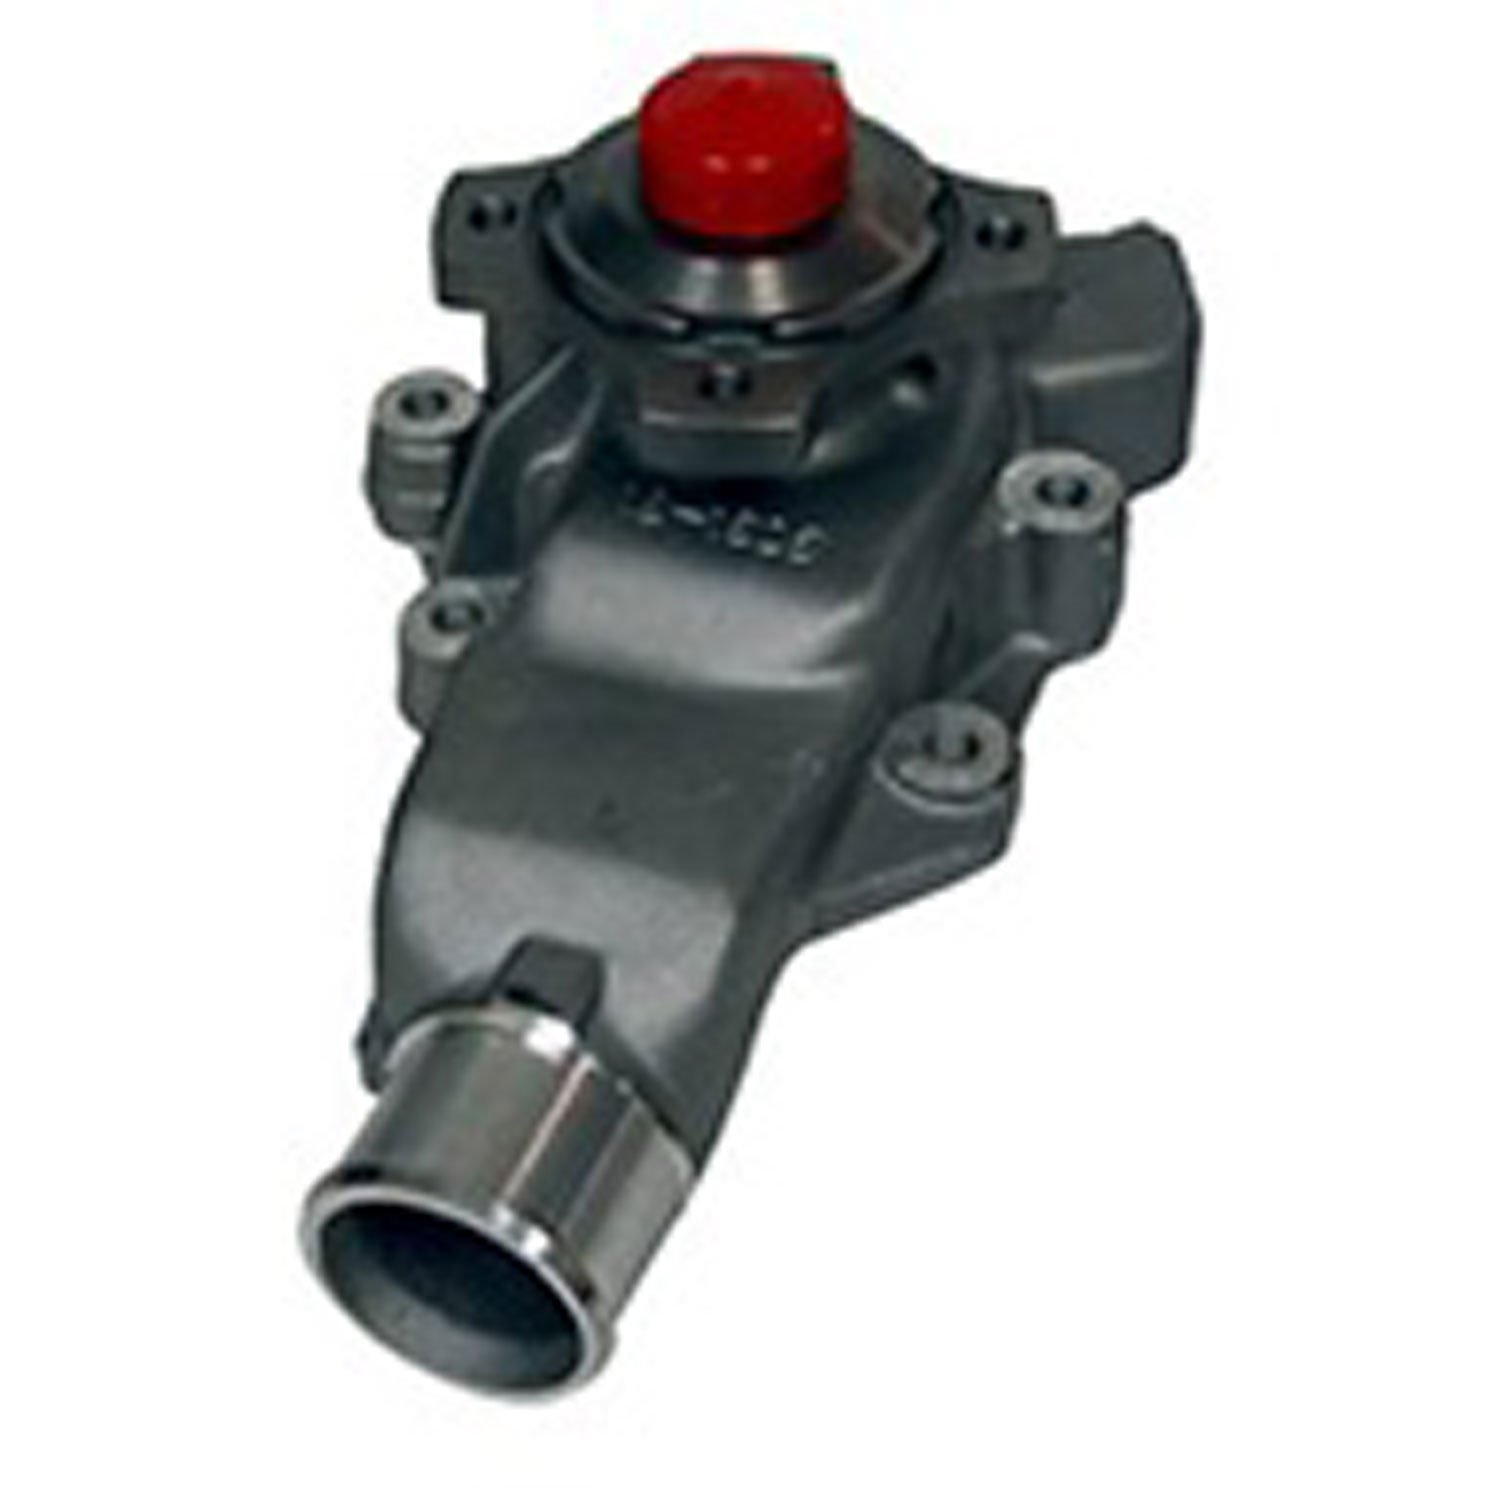 This replacement water pump from Omix-ADA fits 99-04